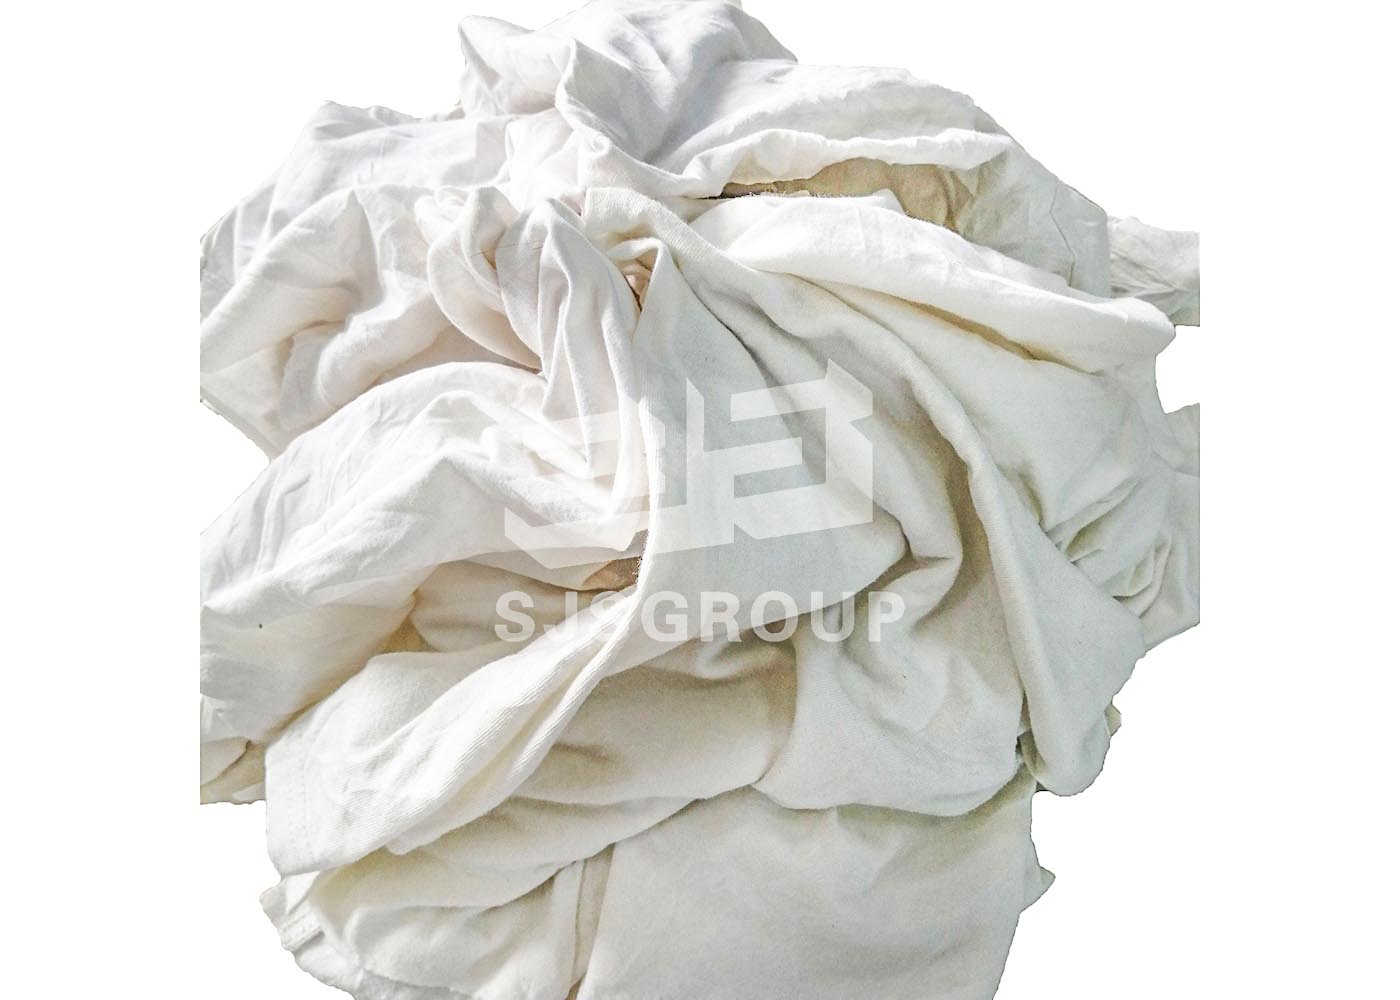 White Bed Sheet Rags-White Bed Sheet Cotton Rags(uncut)